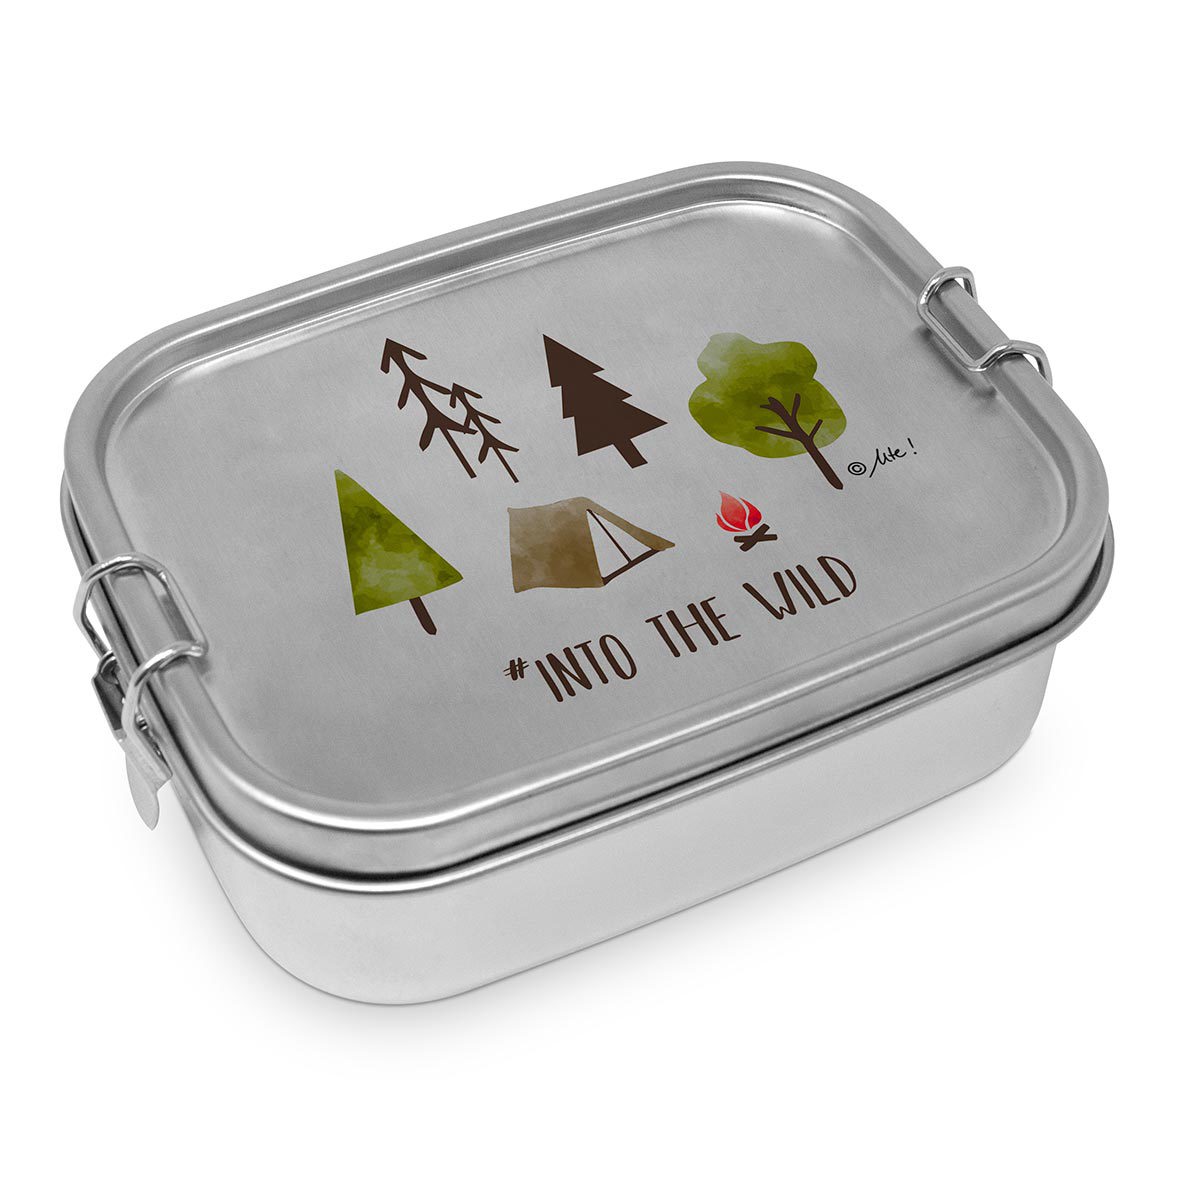 Into the wild Steel Lunch Box